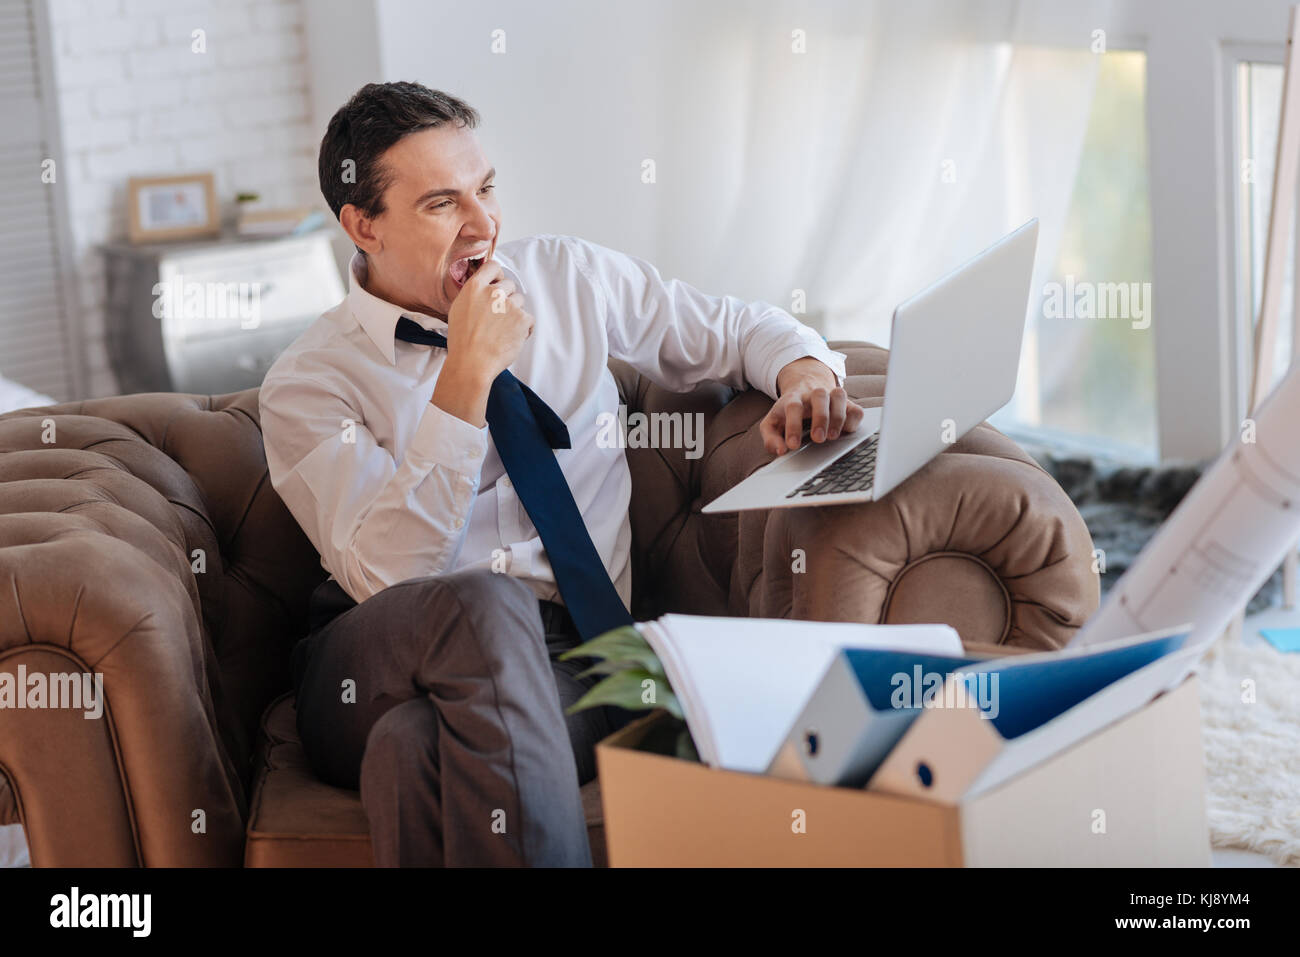 Tired working man feeling sleepy while sitting with a laptop Stock Photo